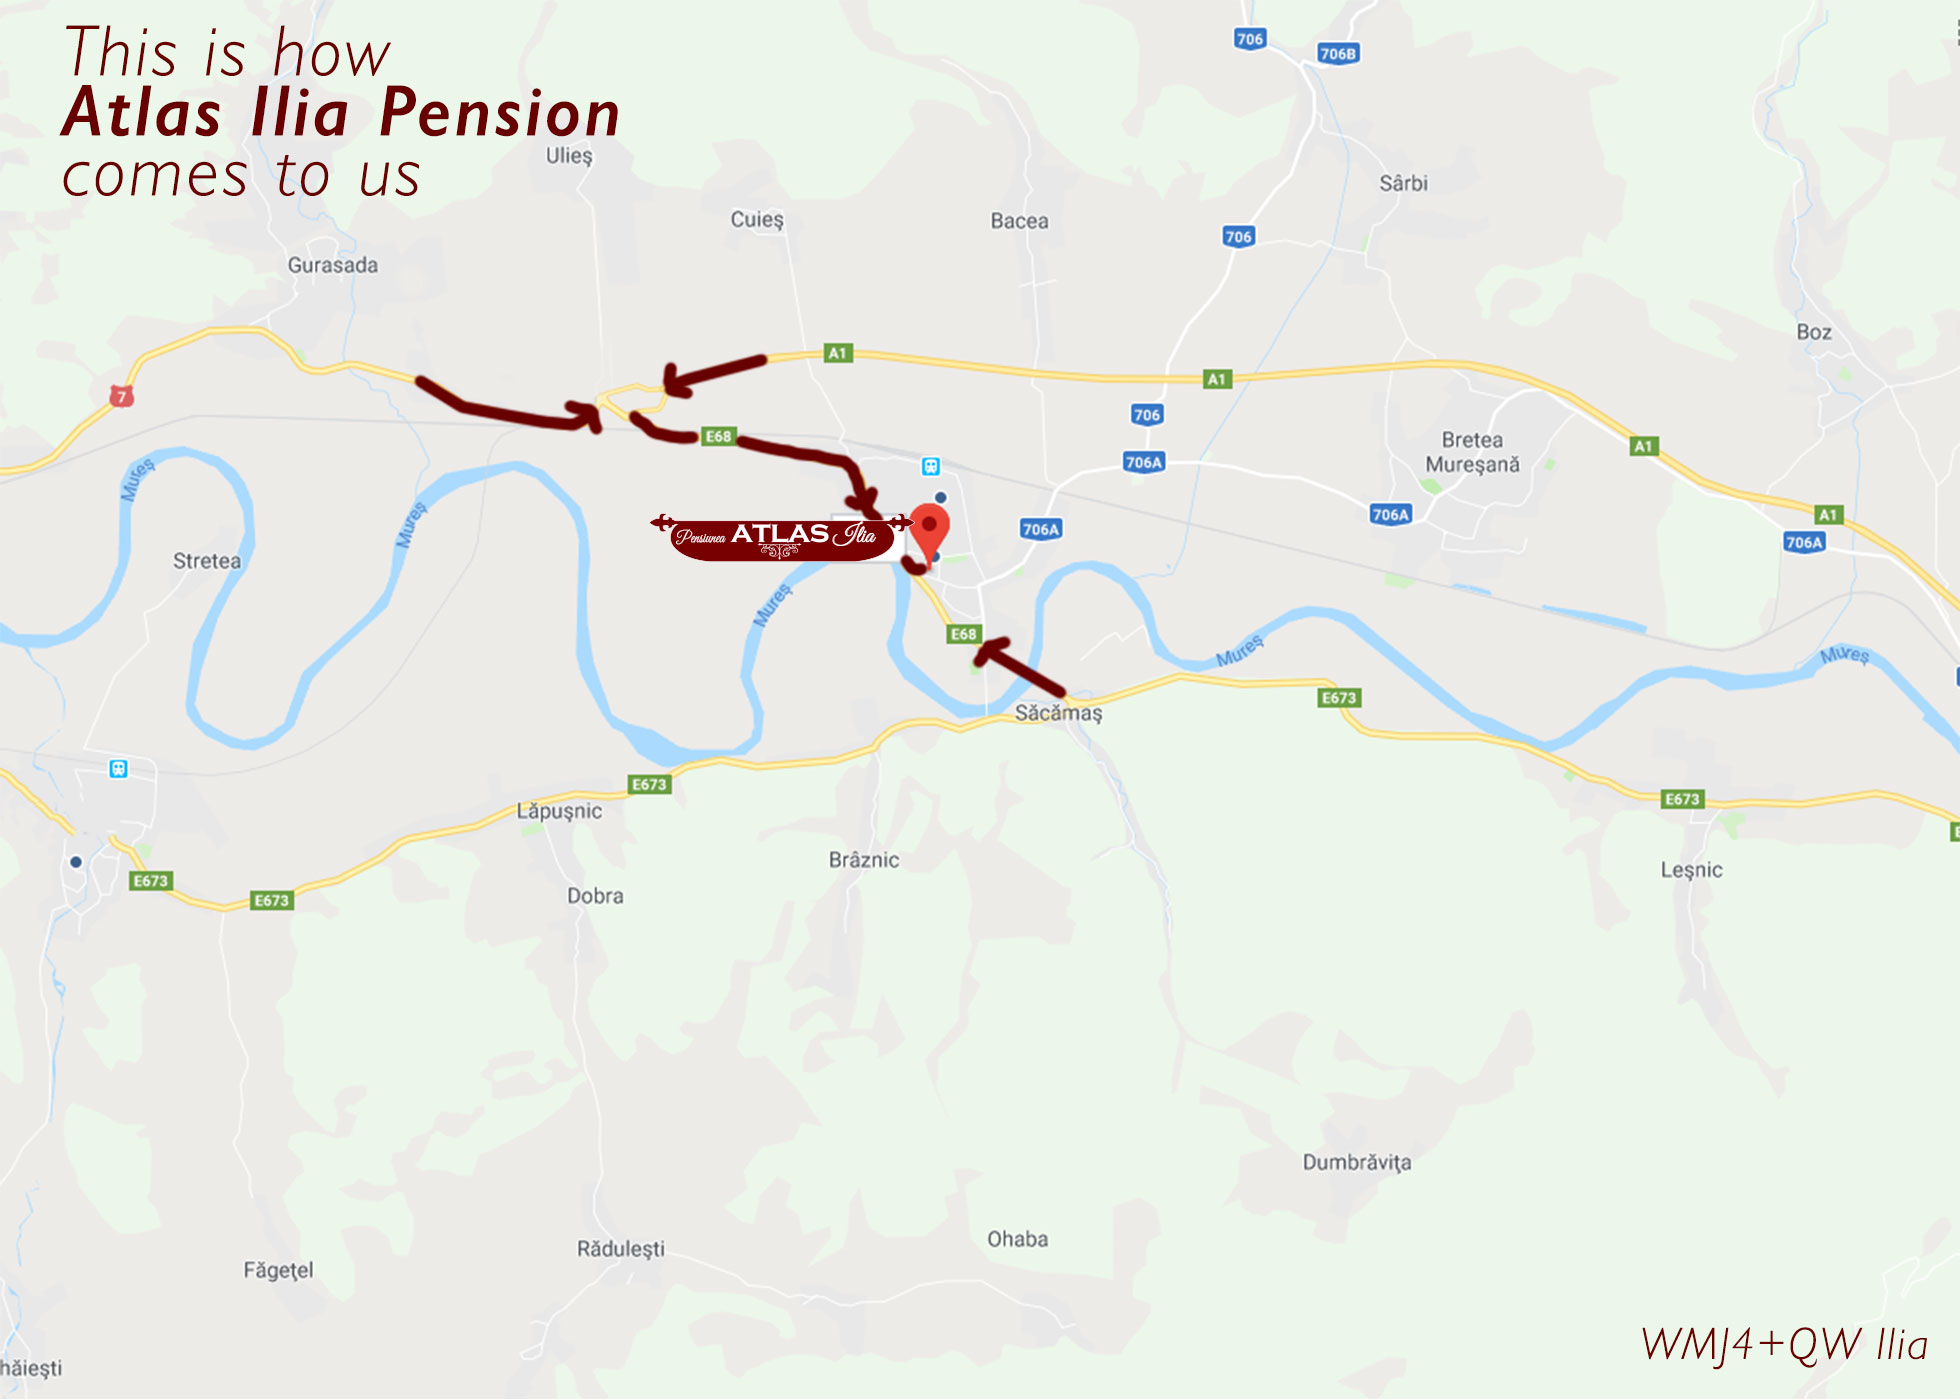 Here's an offline map of how to find Atlas pension in Ilia